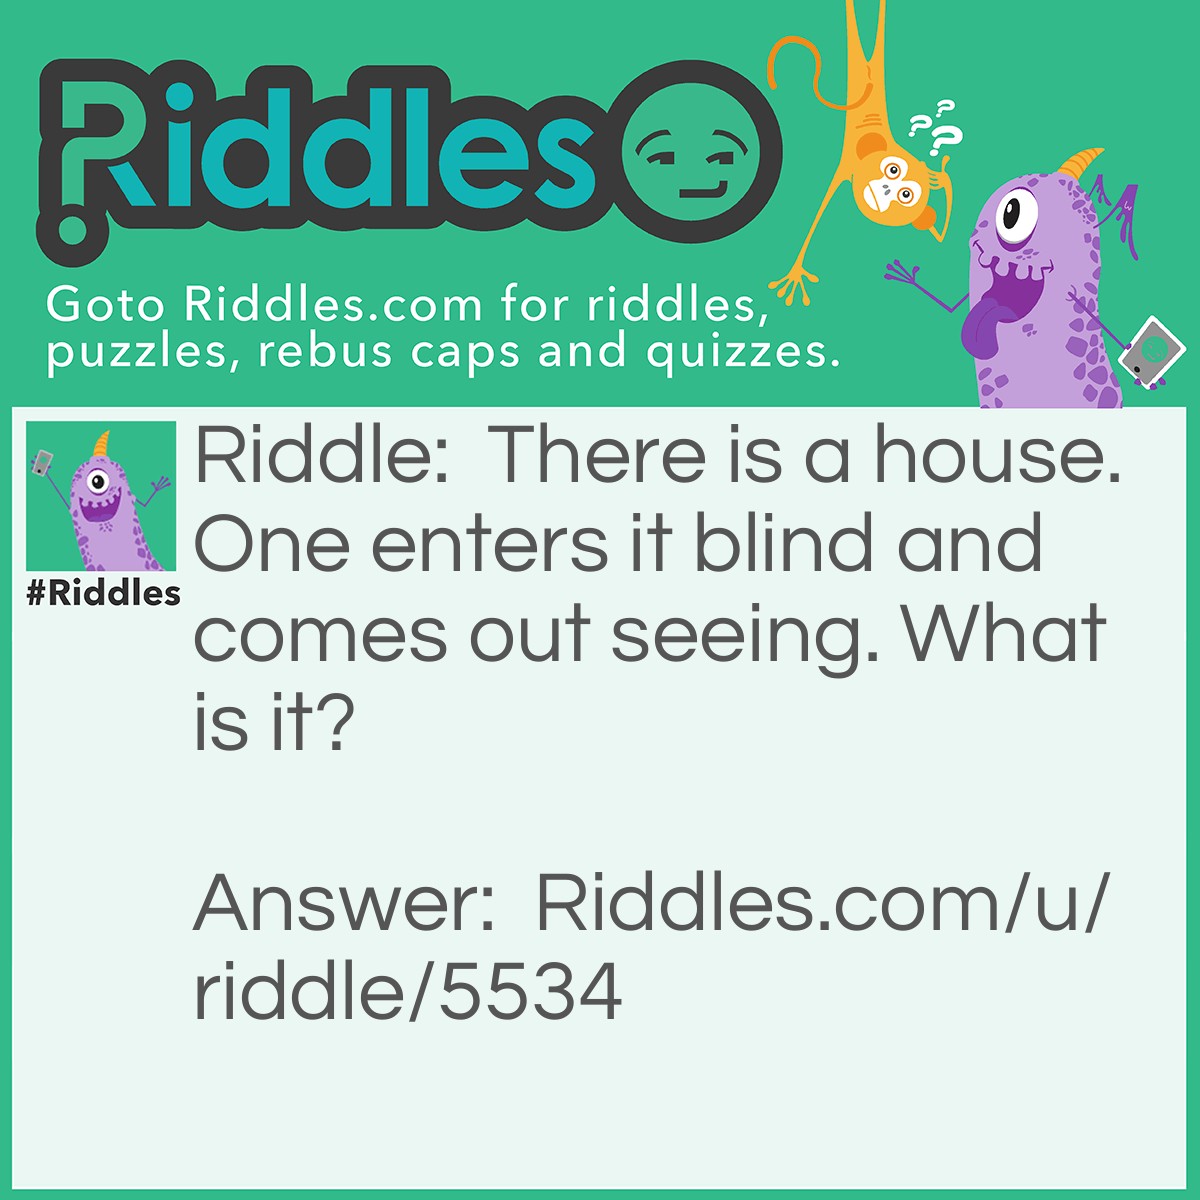 Riddle: There is a house. One enters it blind and comes out seeing. What is it? Answer: A school.